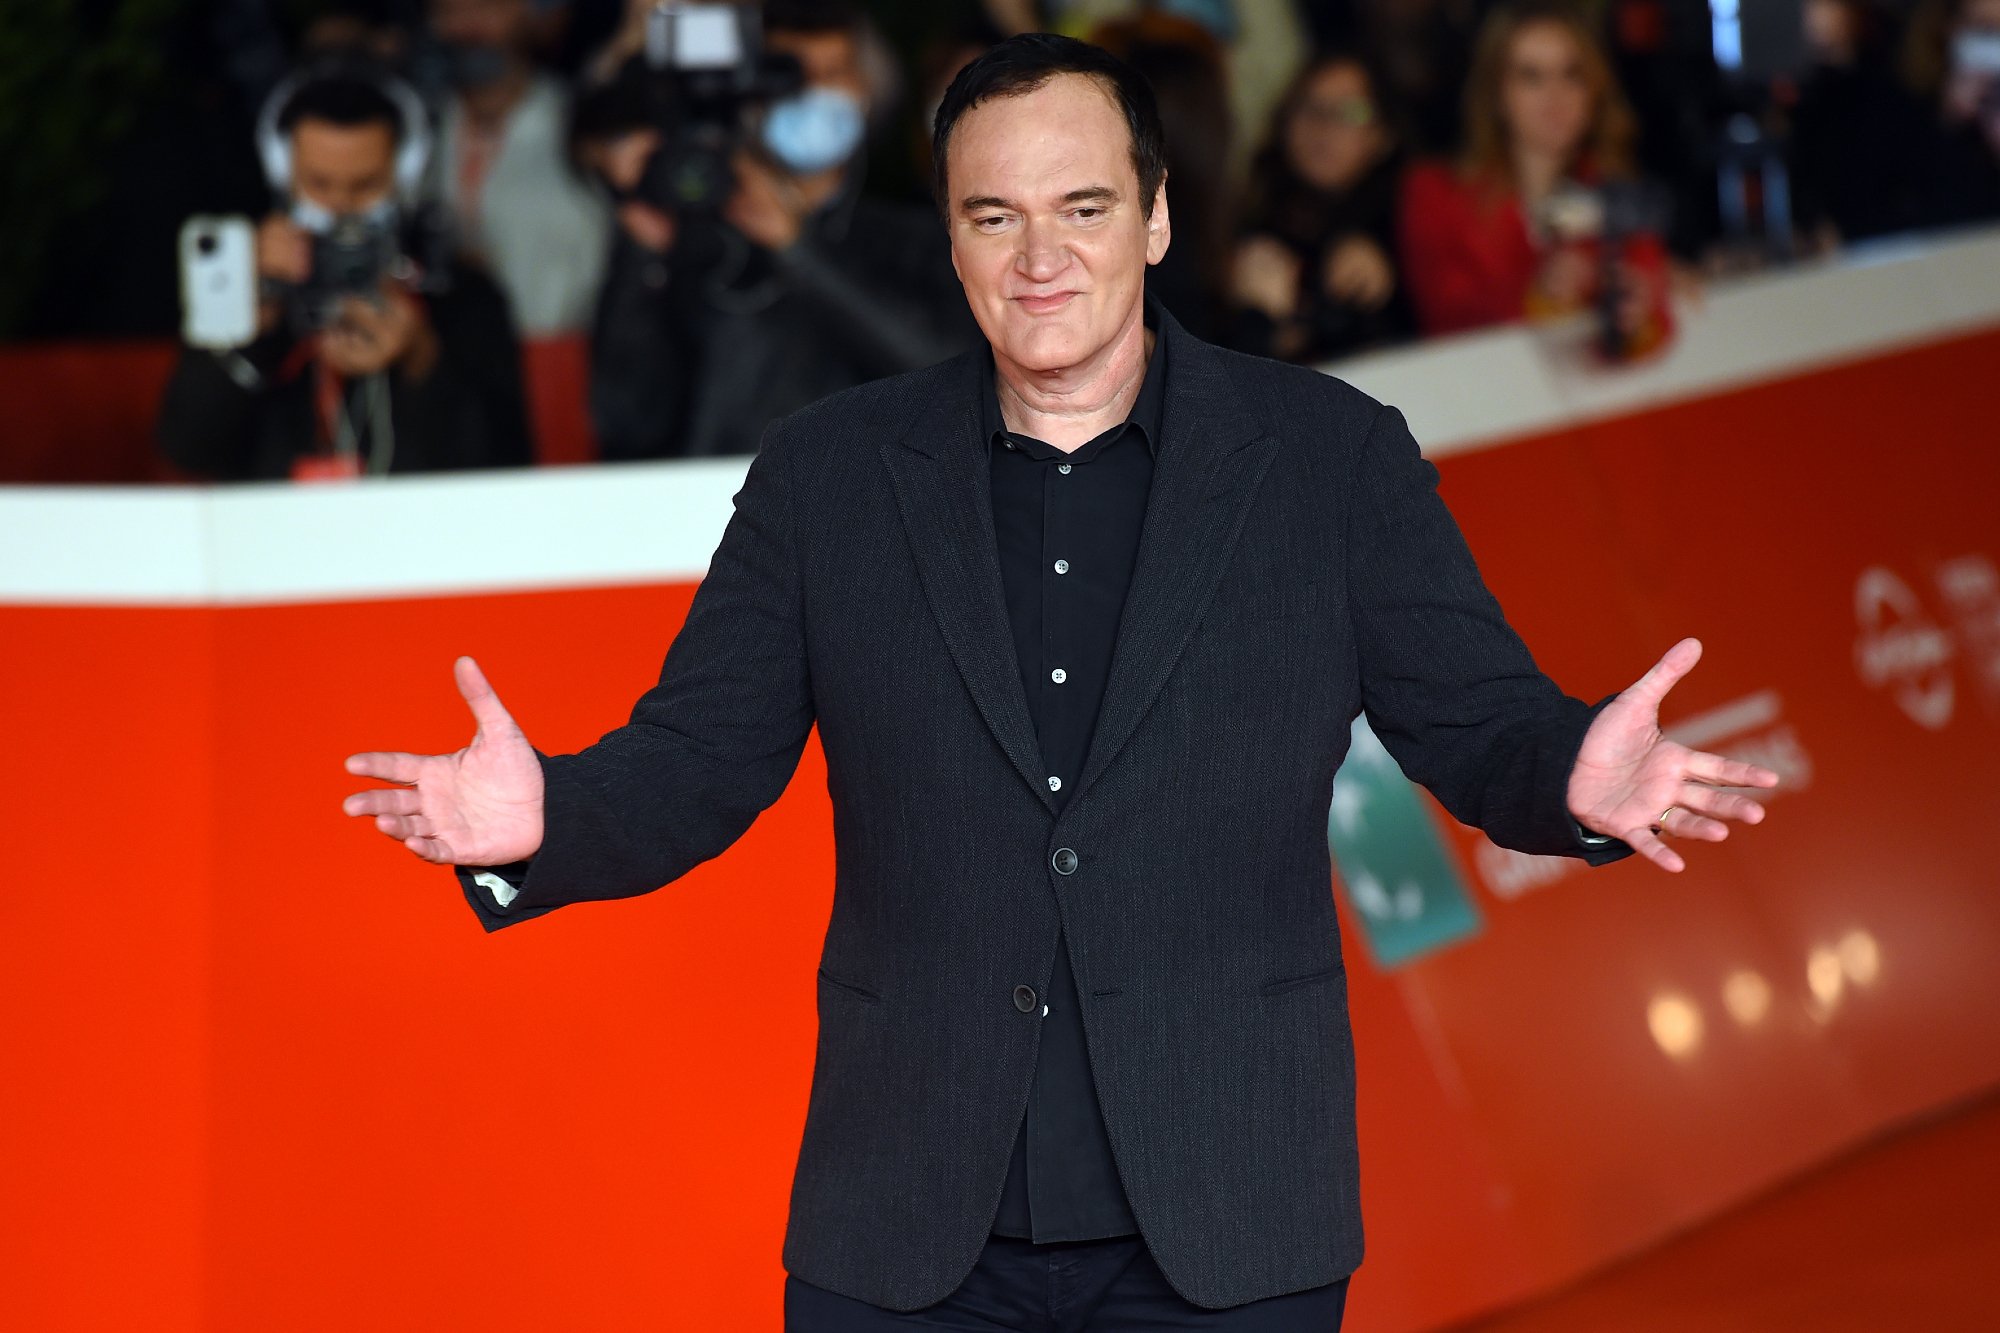 Quentin Tarantino at the Rome Film Festival holding his arms open